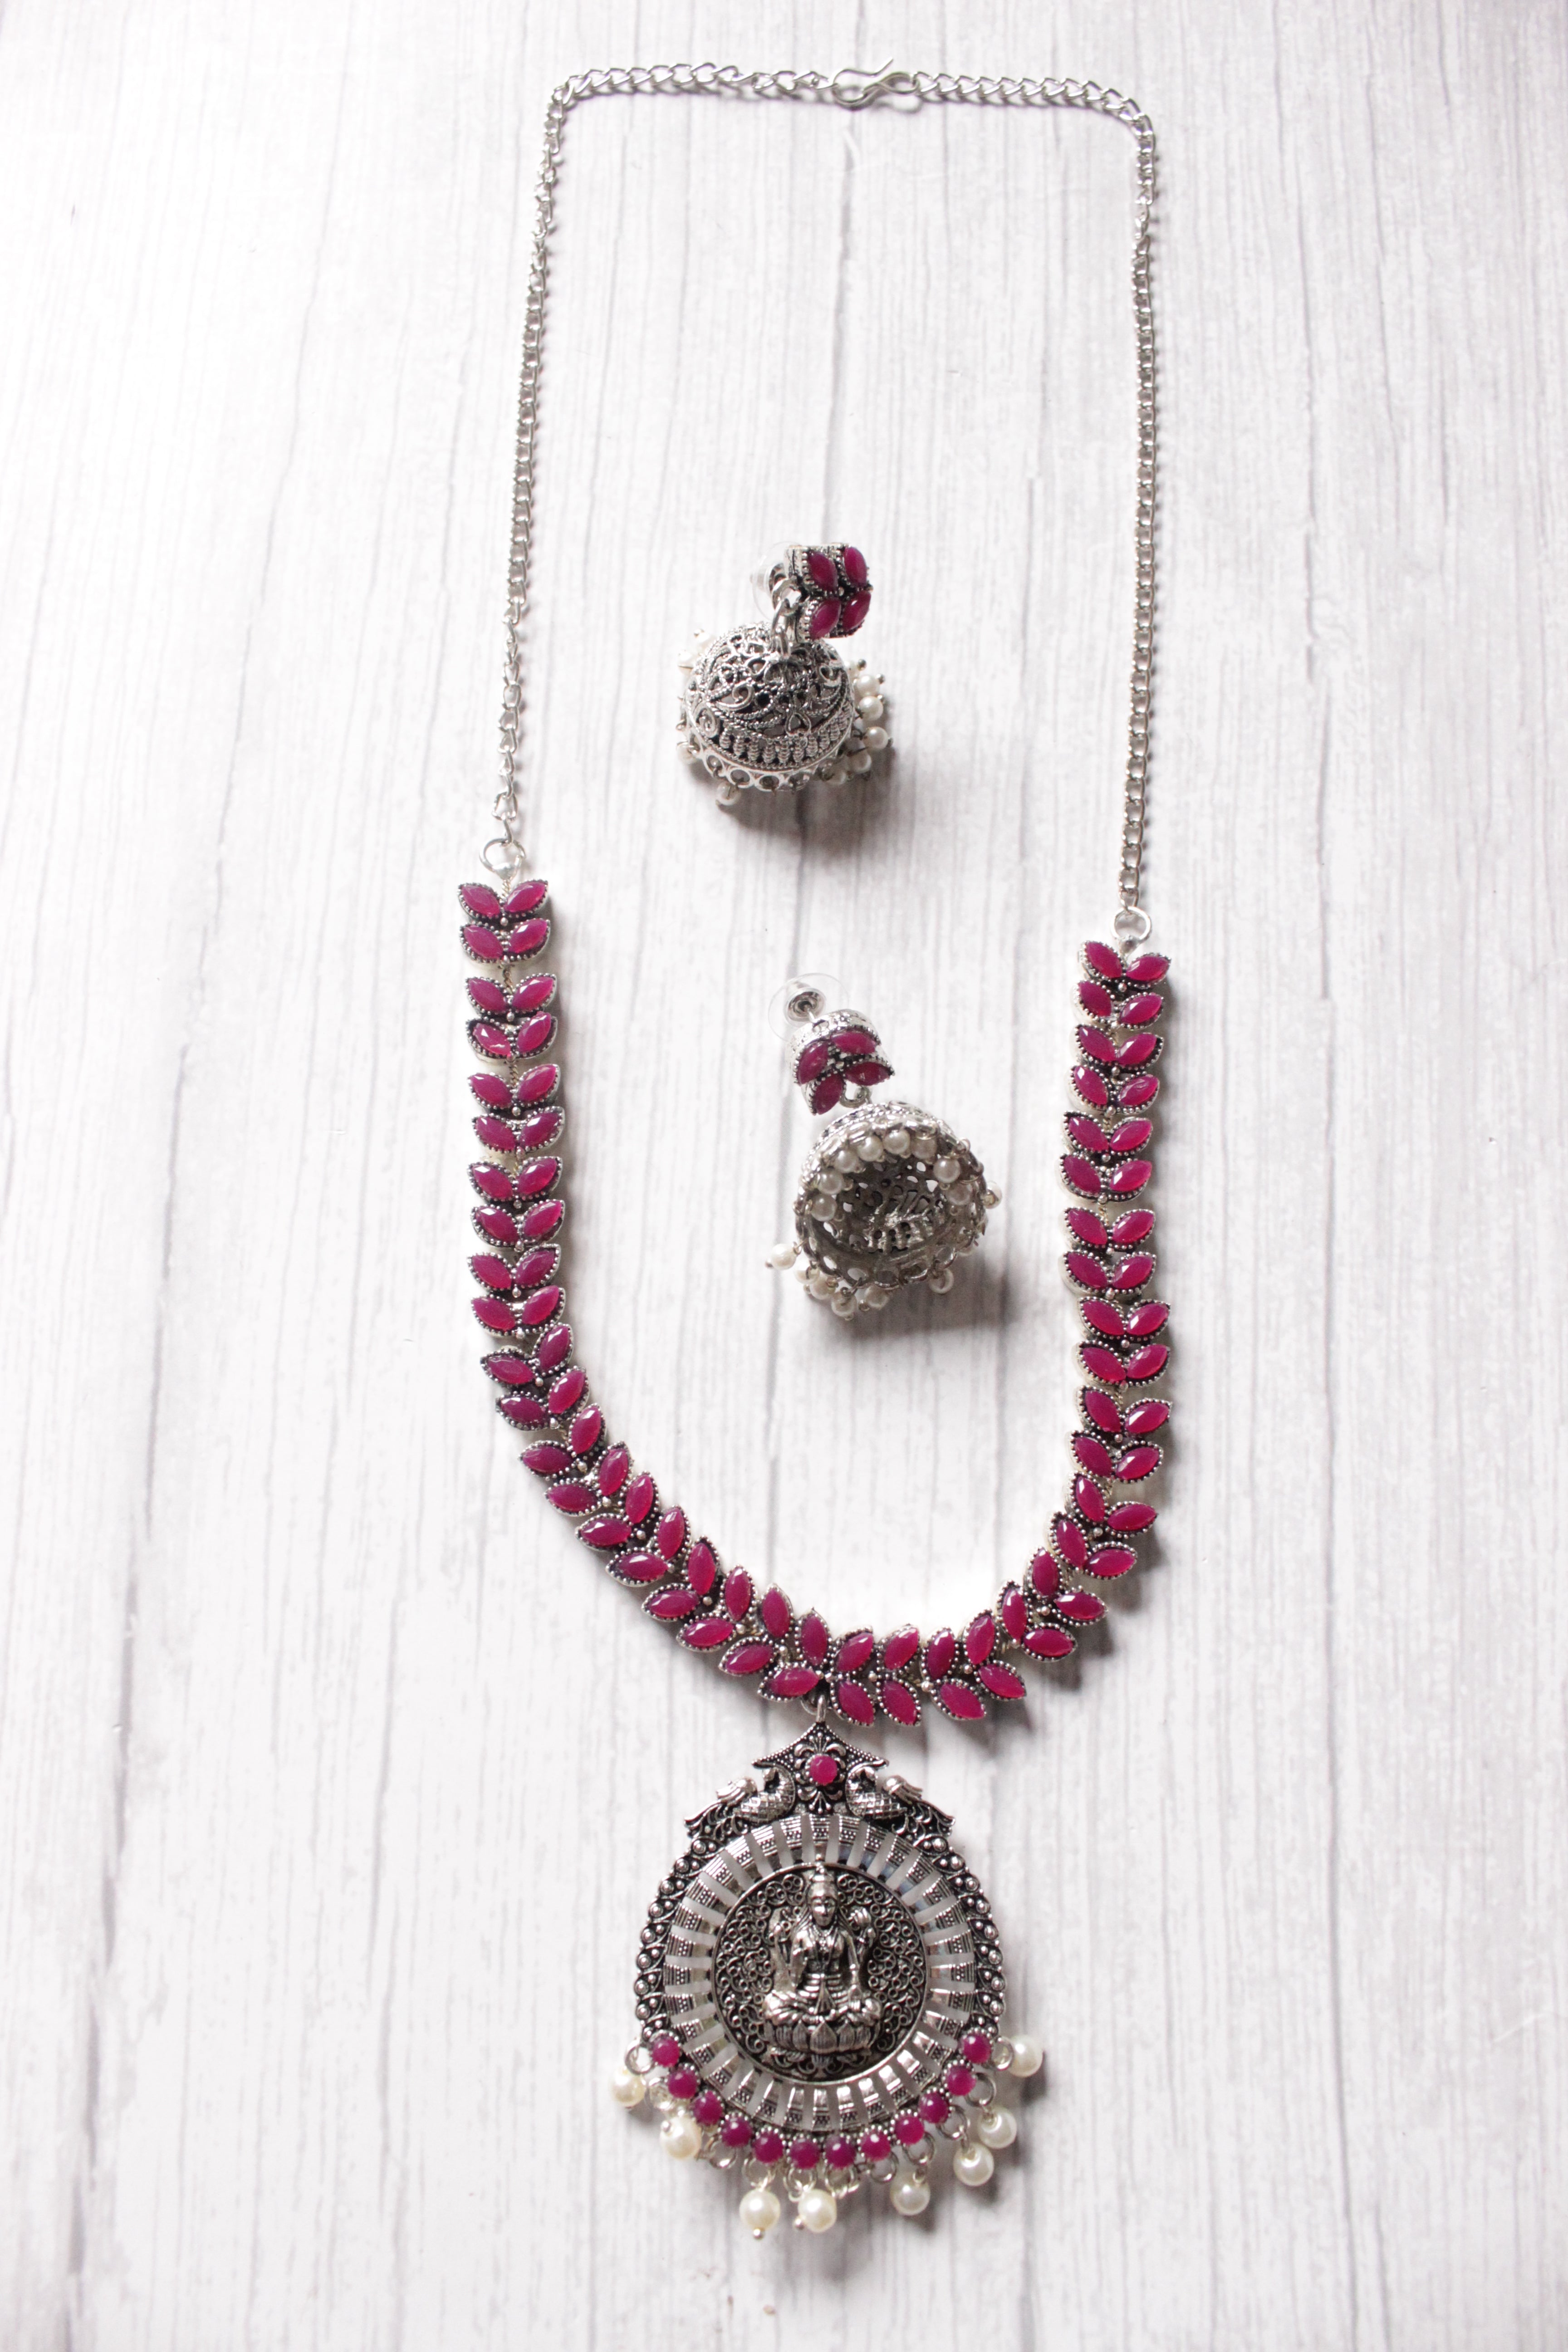 Fuchsia Glass Stones Embedded Religious Motif Adjustable Length Metal Necklace Set with Jhumka Earrings